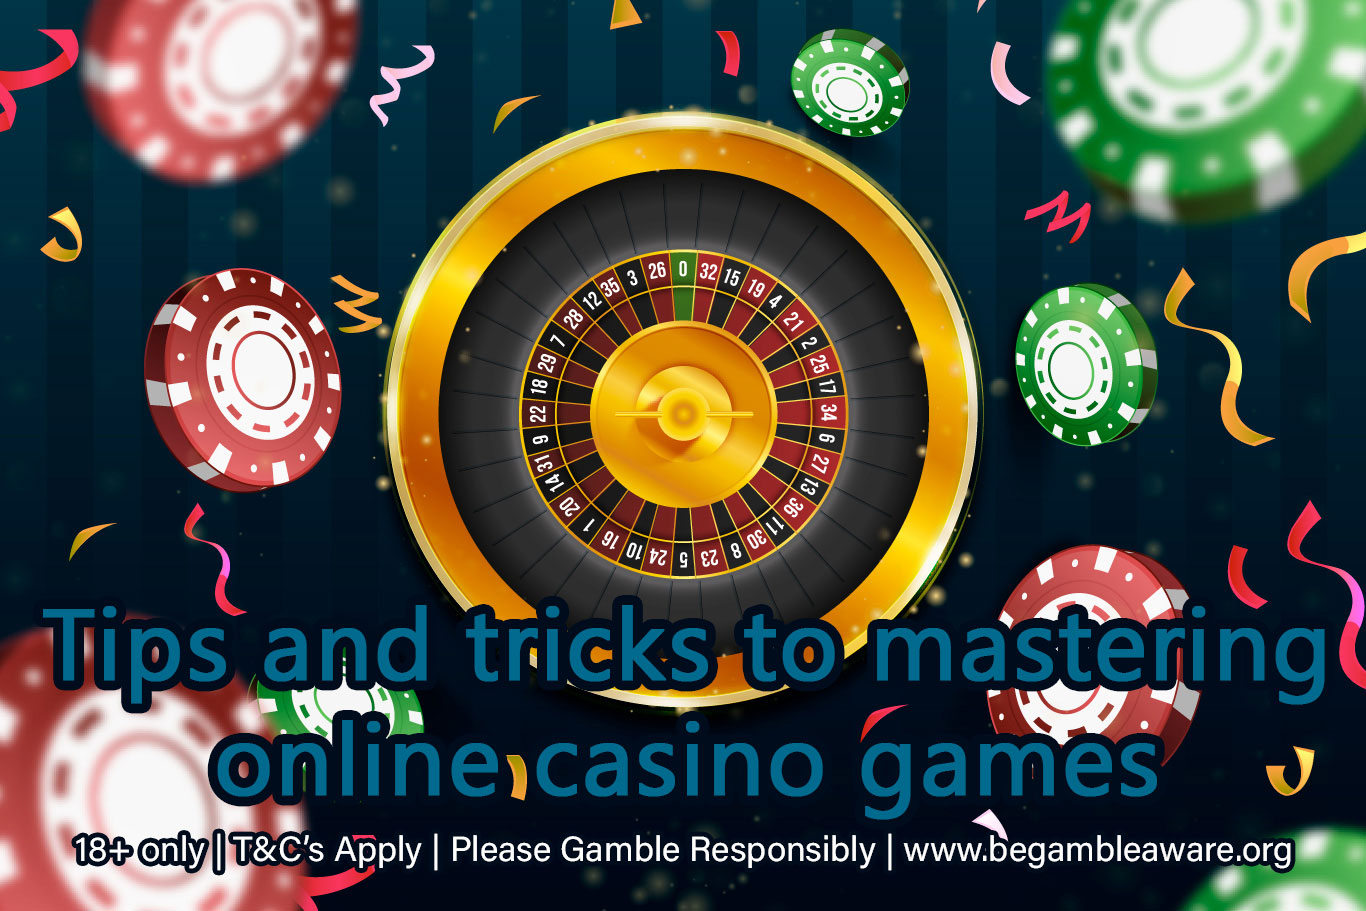 Tips and tricks to mastering online casino games